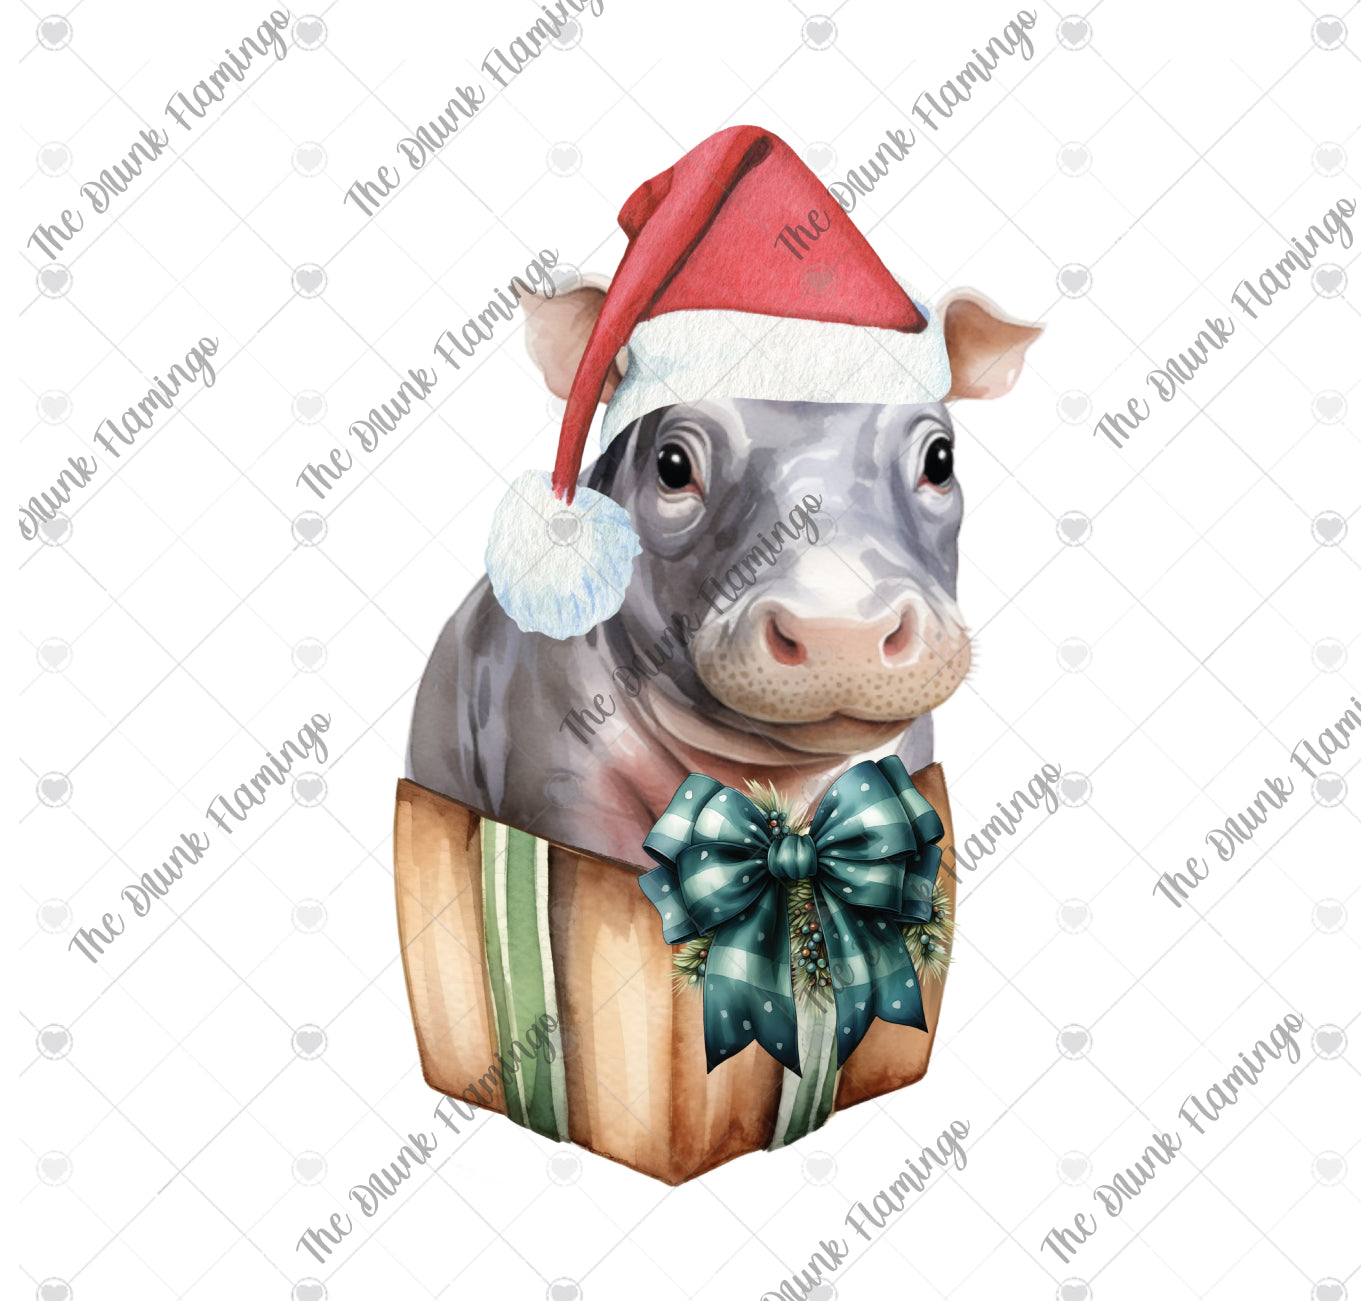 118-  Christmas hippo in box  WHITE decal